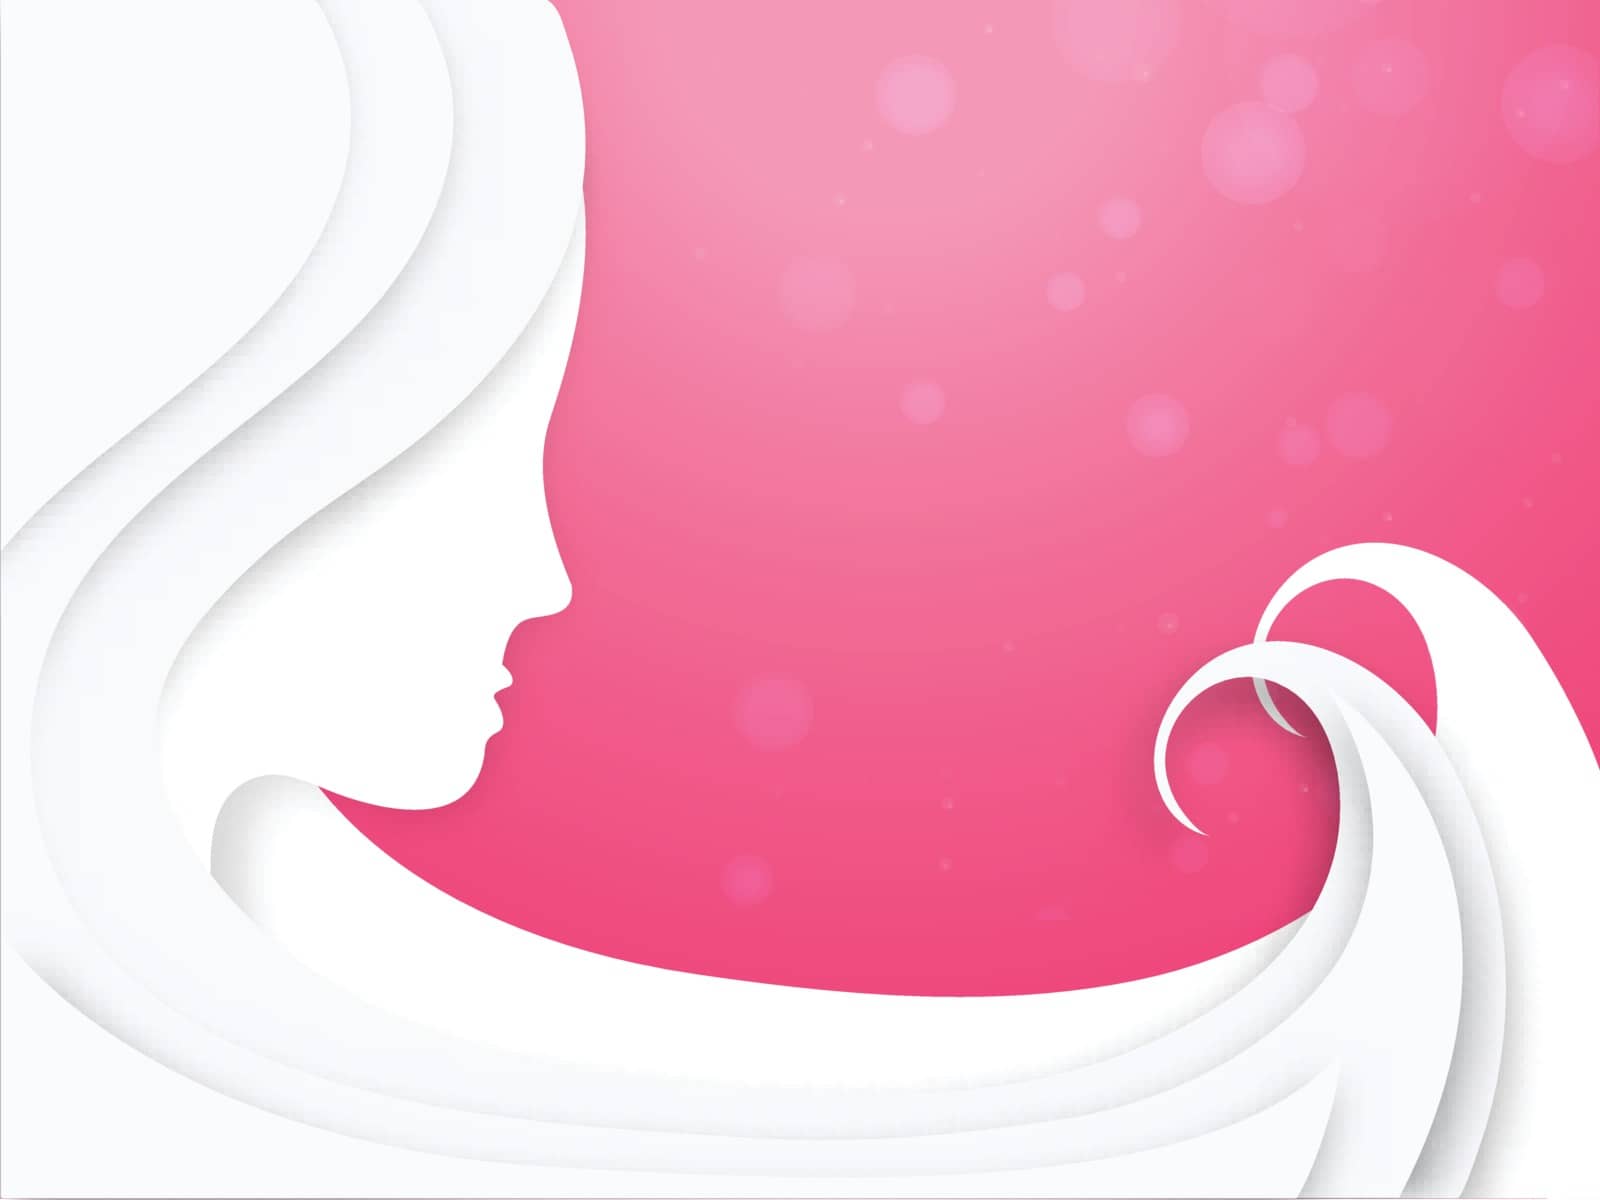 Paper cut style woman face on glossy pink background for women's by aispl